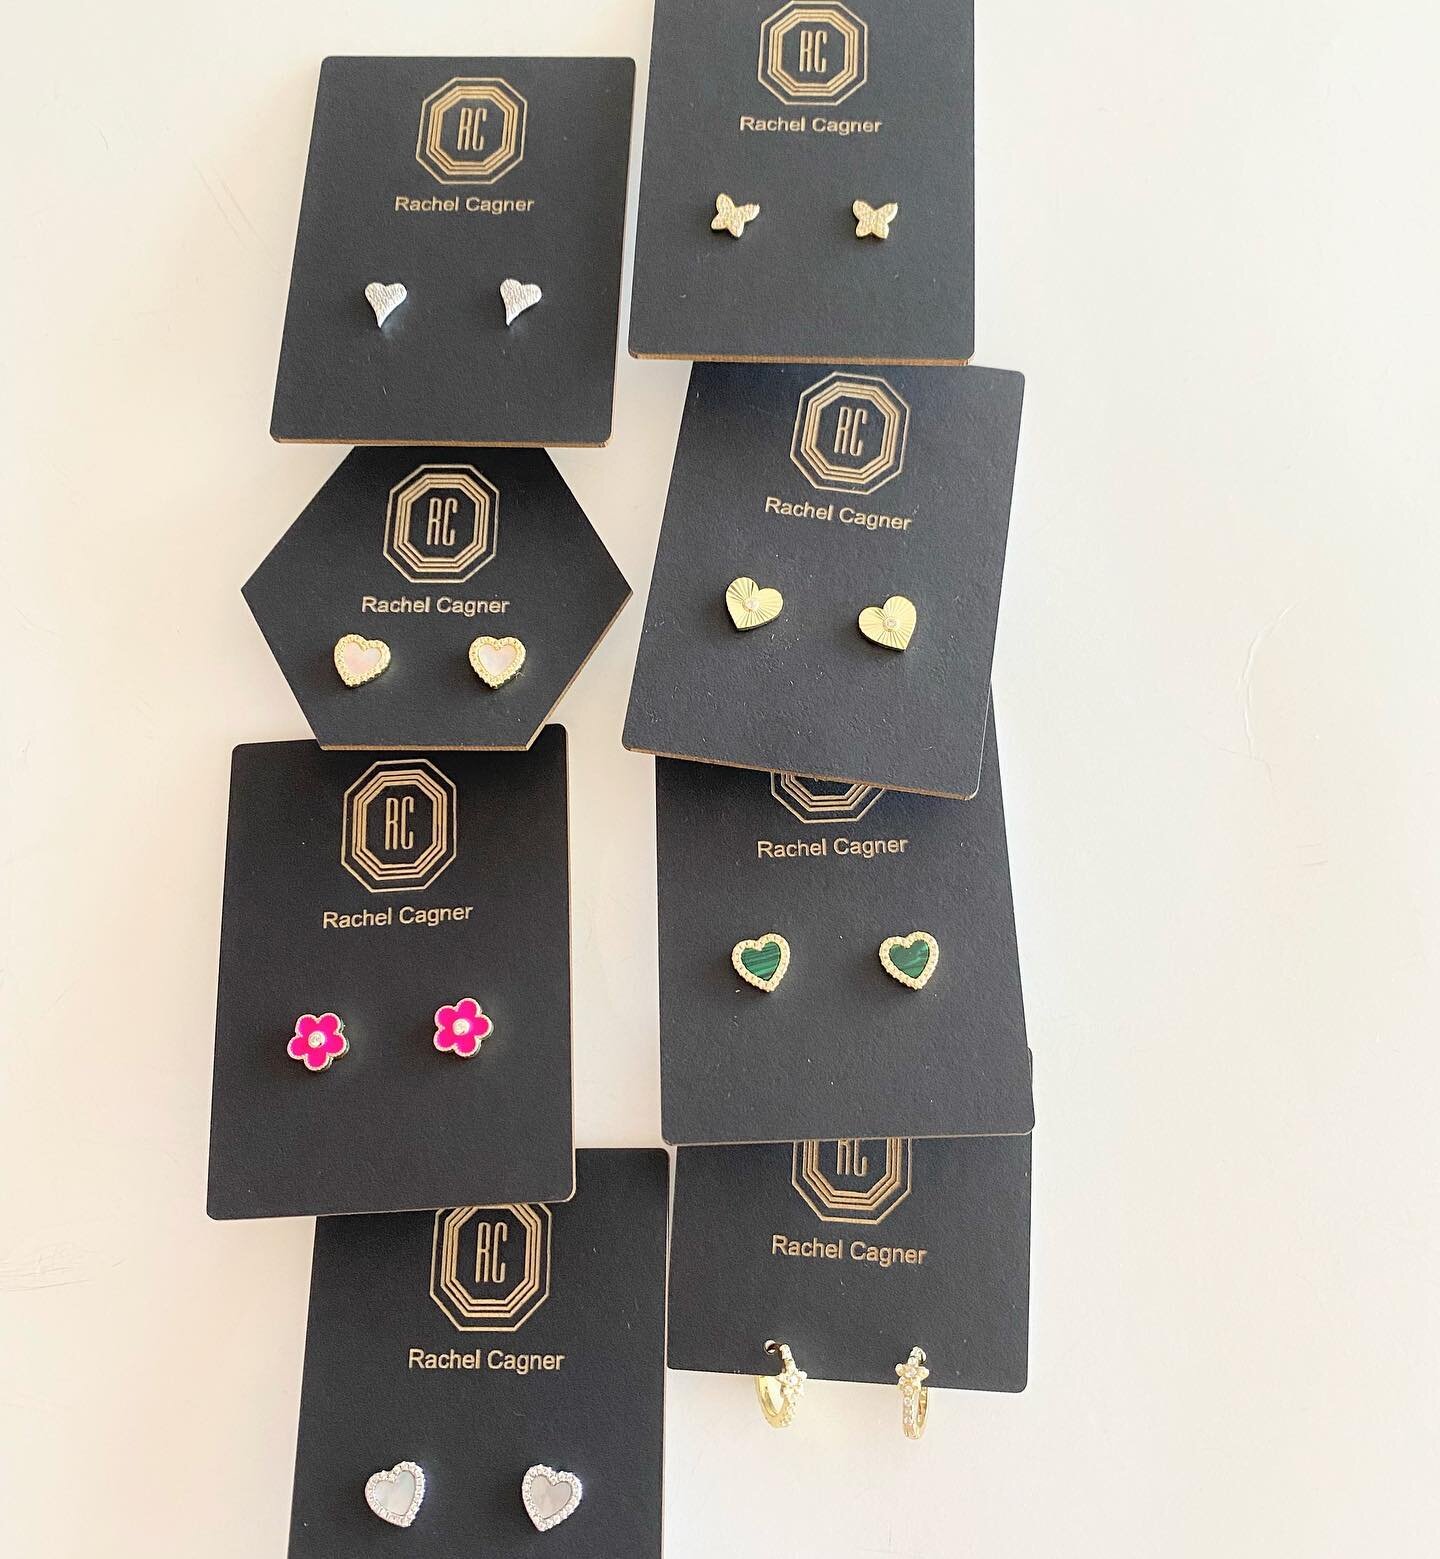 Lots of fun options, shop our exclusive earring collection ❤️❤️❤️❤️